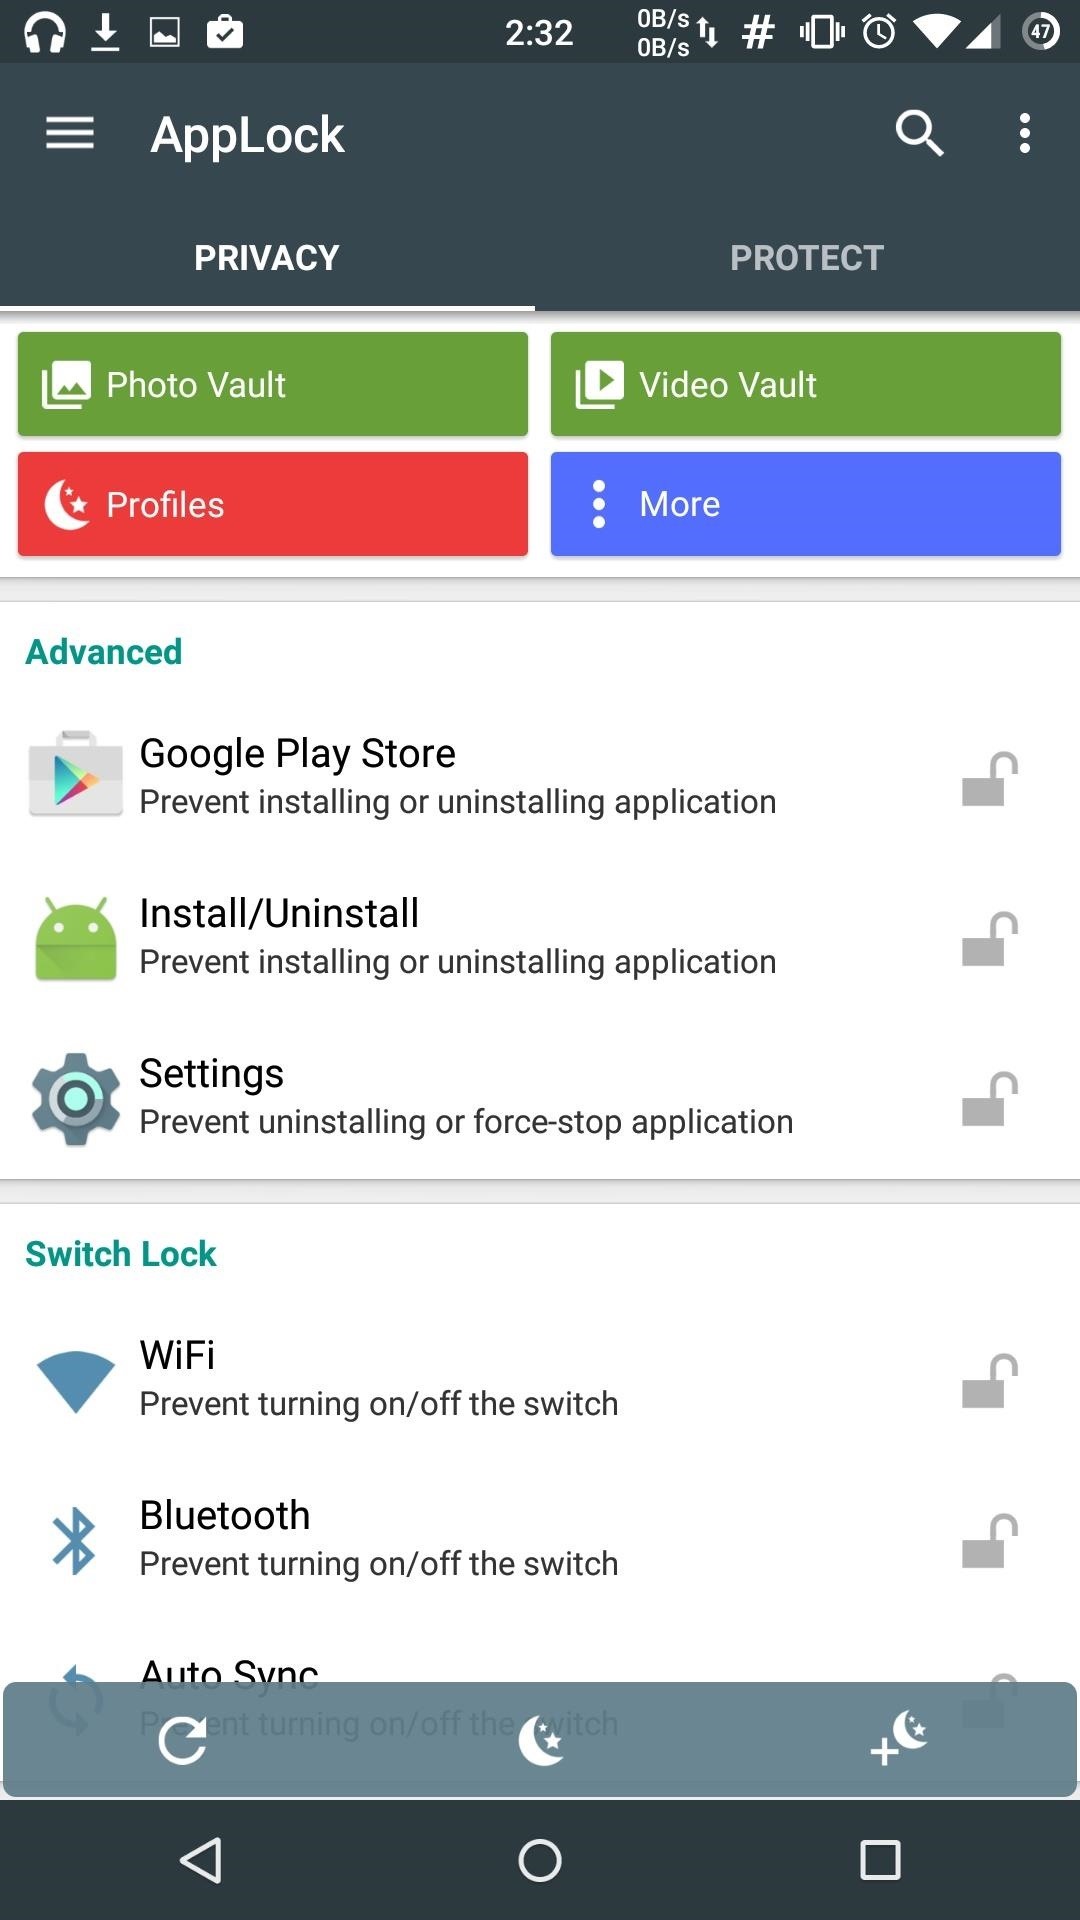 Android Parental Controls 101: Settings to Tweak on Your Kid's Phone